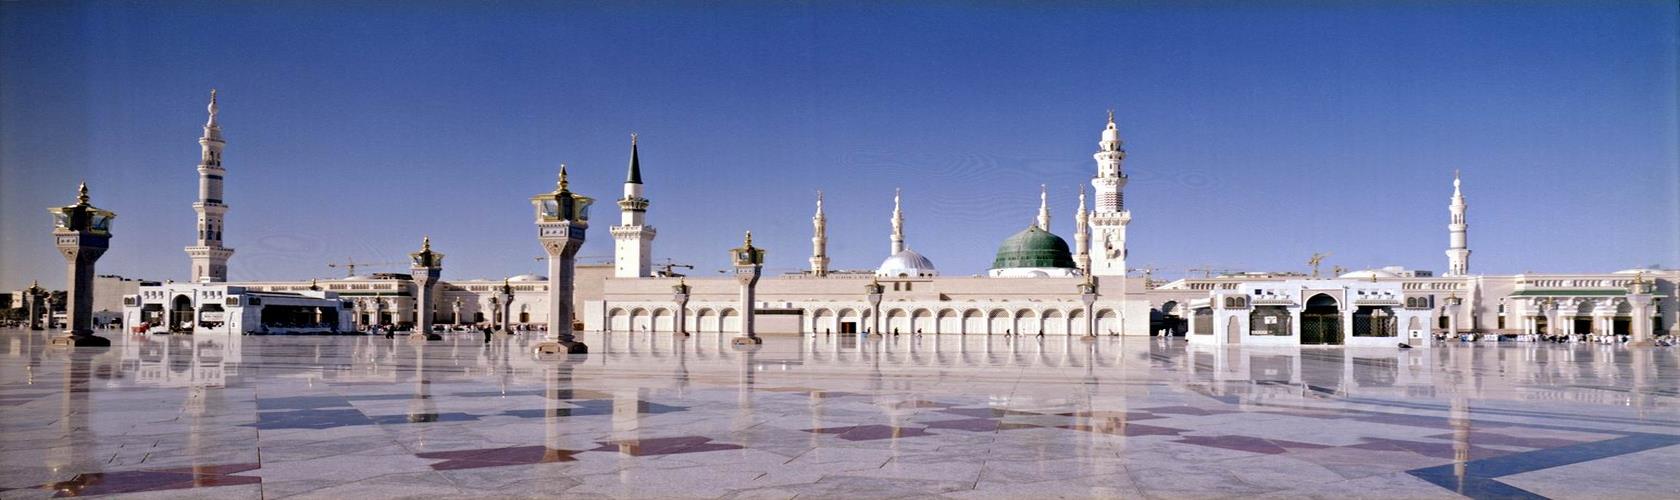 AL-Badar Tours & Travels offer Hajj, Umrah , Ziyarat,Domestic & International Packages with quality services and affordable prices in the market. We are a fully professional Hajj, Umrah & Ziyarat agency based in Srinagar. We can provide you a guaranteed Hajj, Umrah & Ziyarat experience with the best prices in Srinagar.